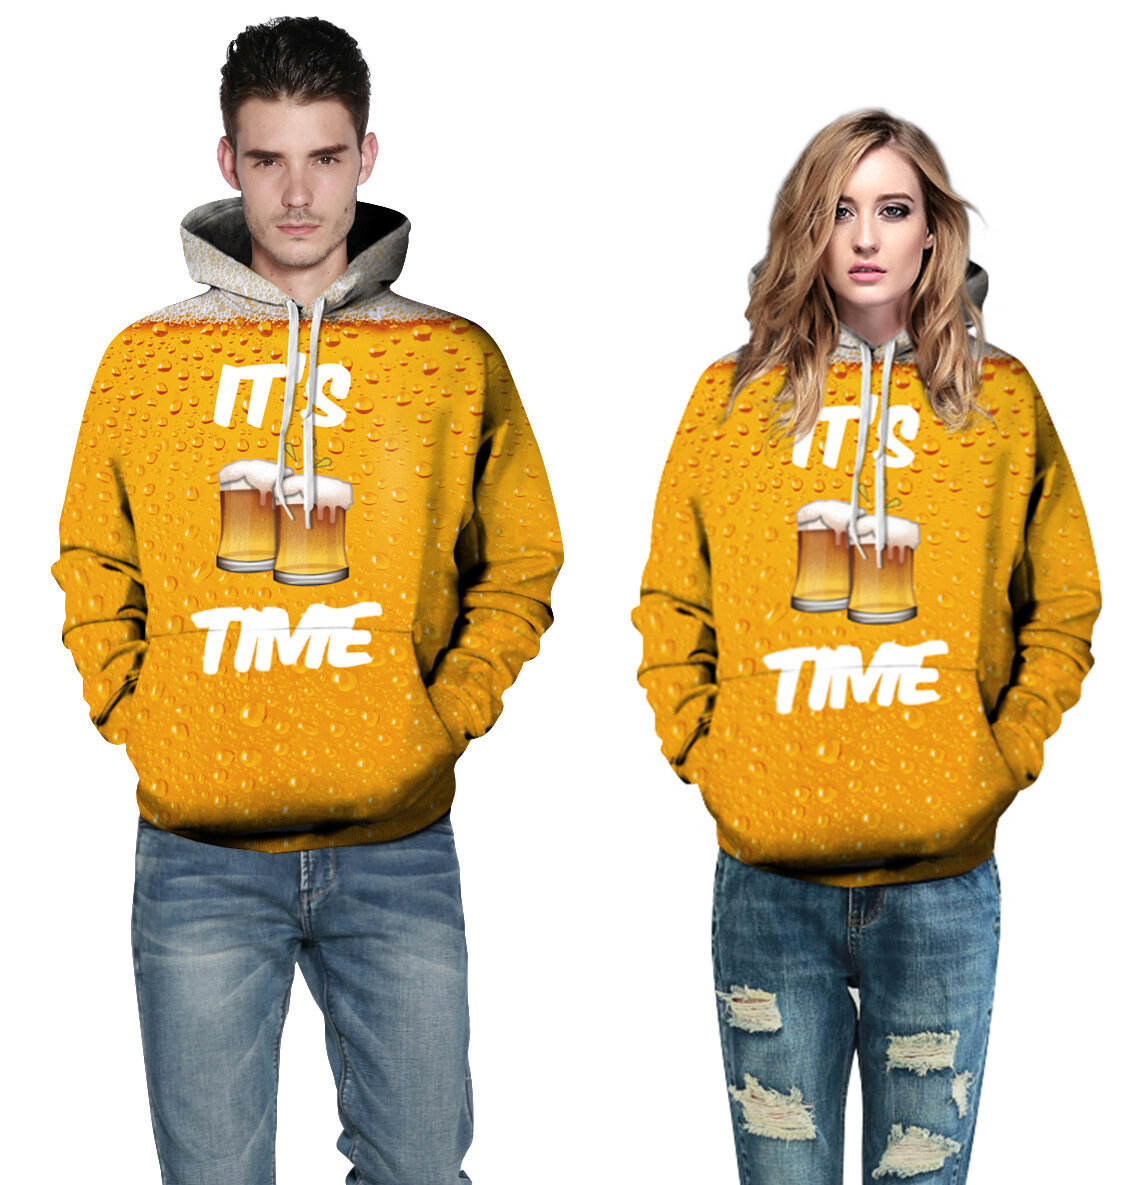 It's Time Food Graphic Hoodie For unisex